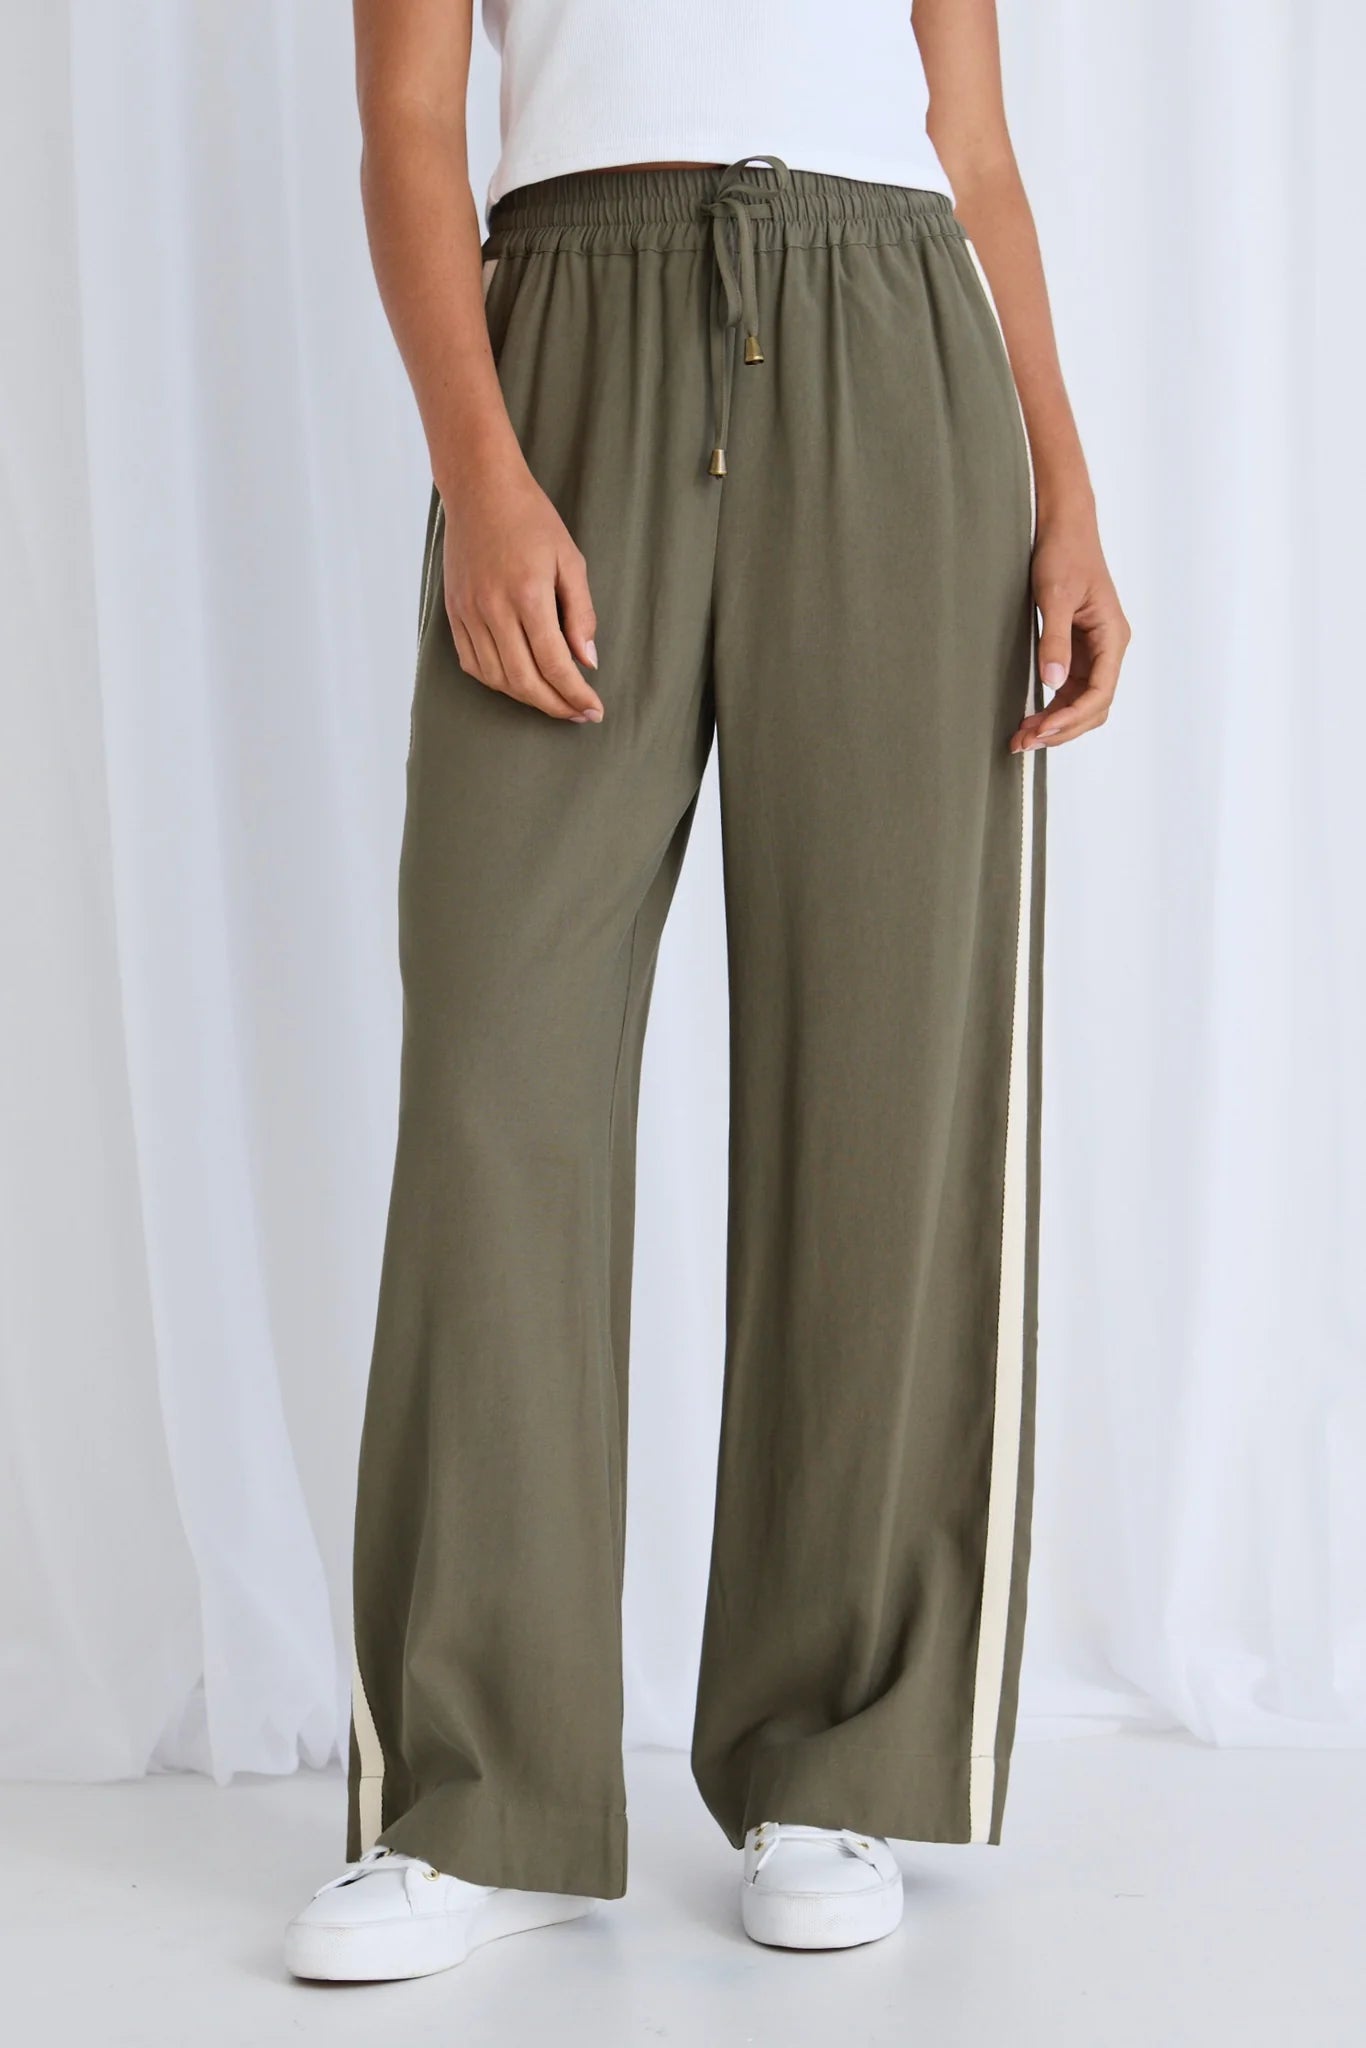 Townie Pant Olive